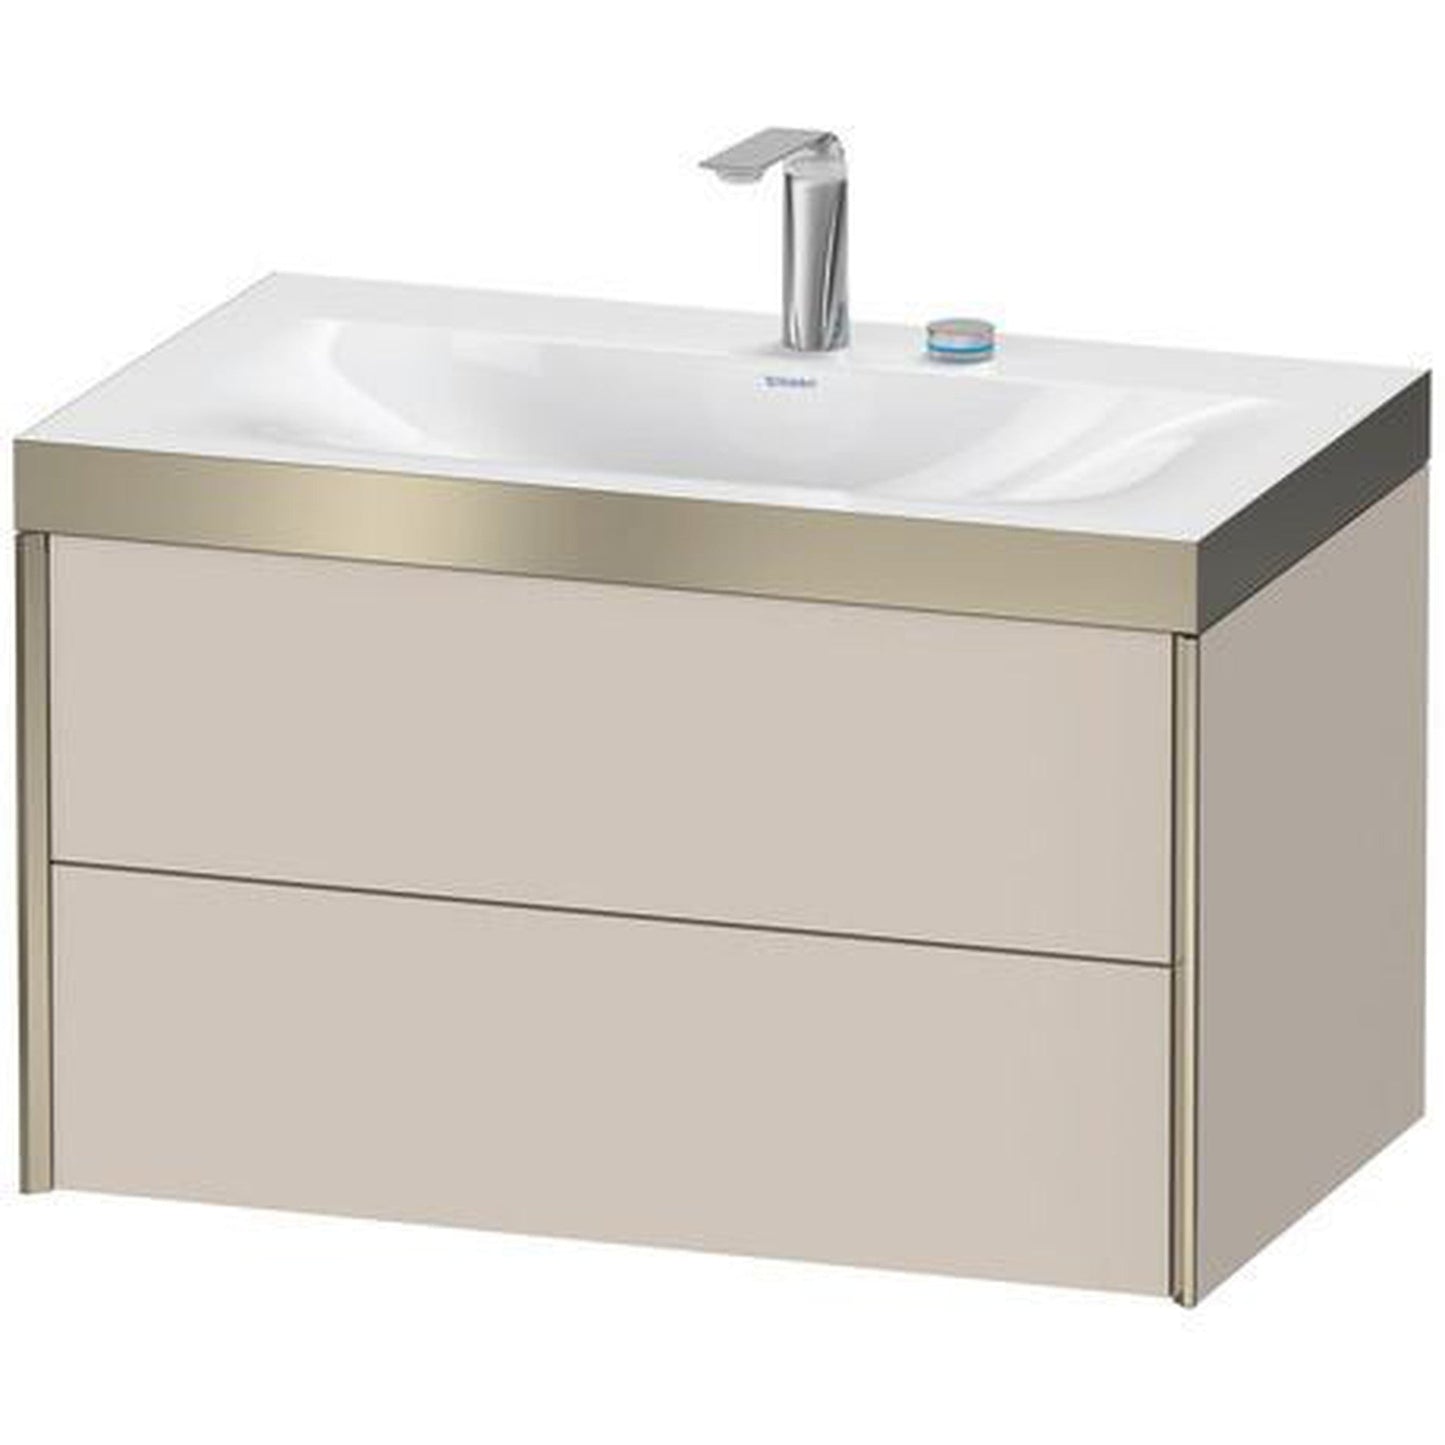 Duravit Xviu 31" x 20" x 19" Two Drawer C-Bonded Wall-Mount Vanity Kit With Two Tap Holes, Taupe (XV4615EB191P)